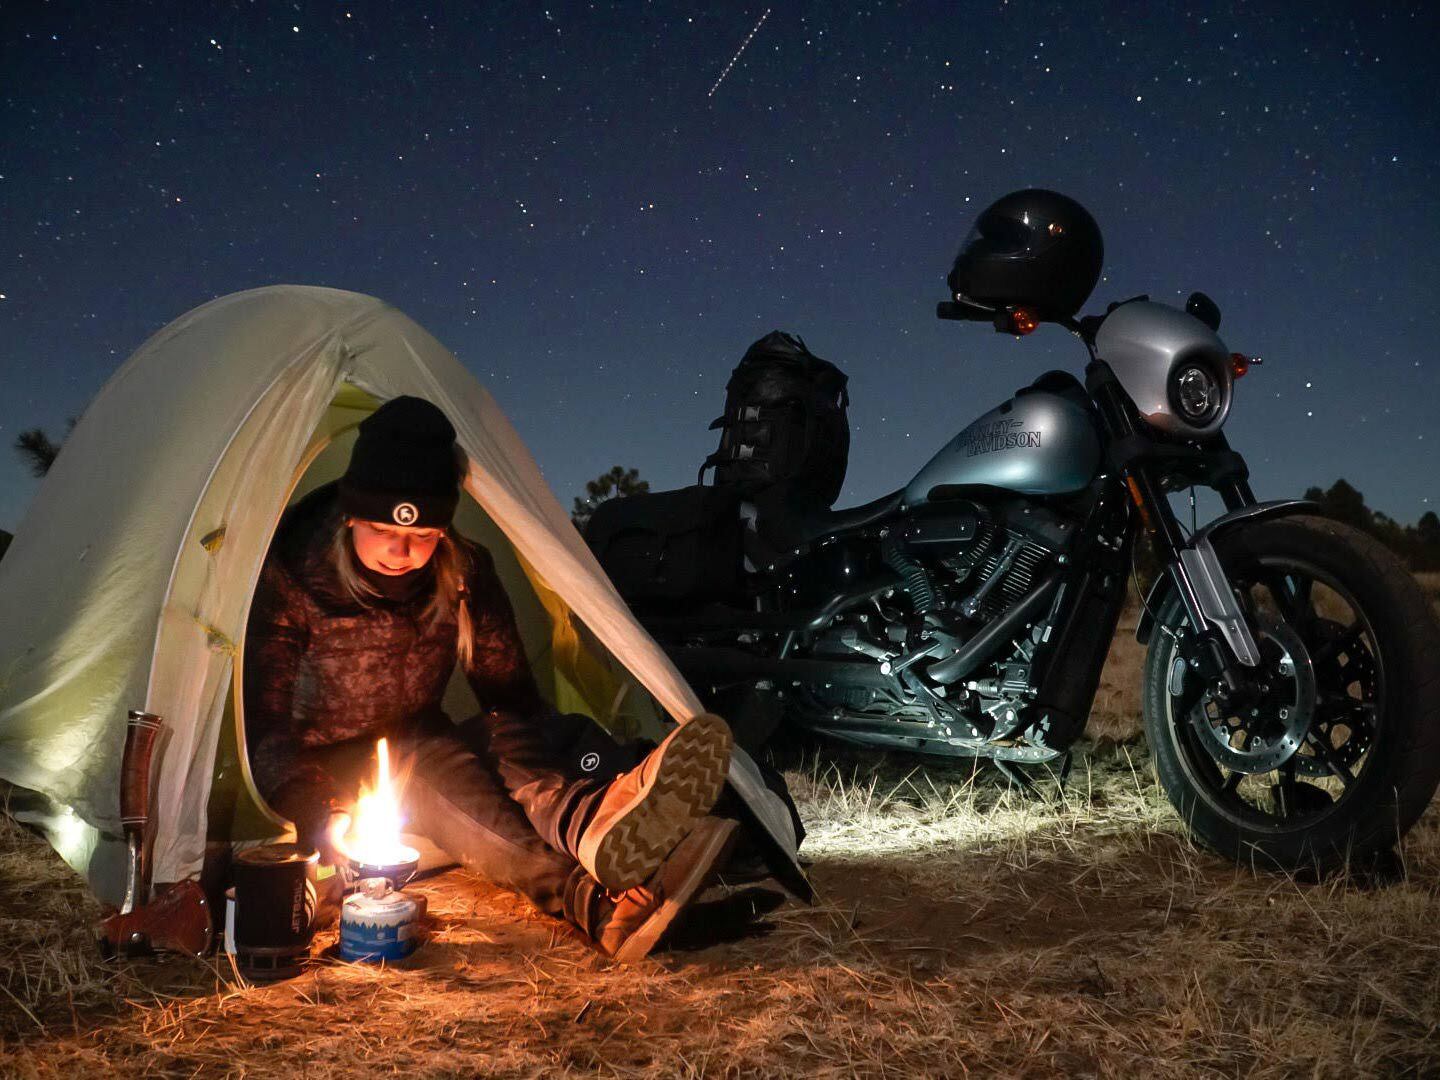 Rider Kalen Thorien is no stranger to misadventure, from crashing to having her camping gear stolen, but regardless, moto trips keep her recharged and grounded.